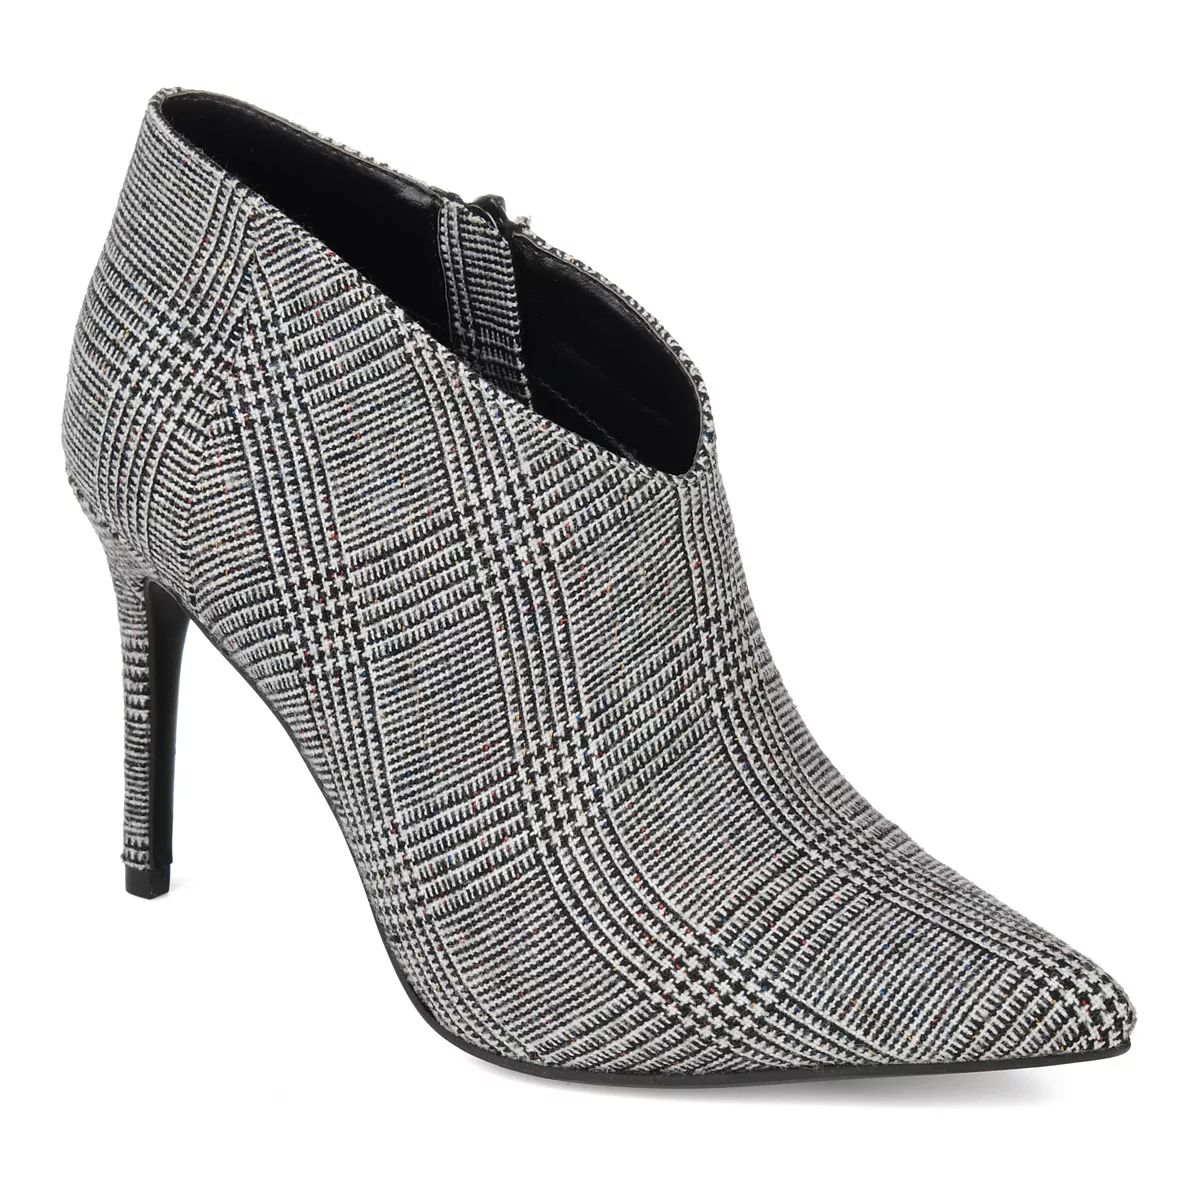 Journee Collection Demmi Women's Ankle Boots | Kohl's